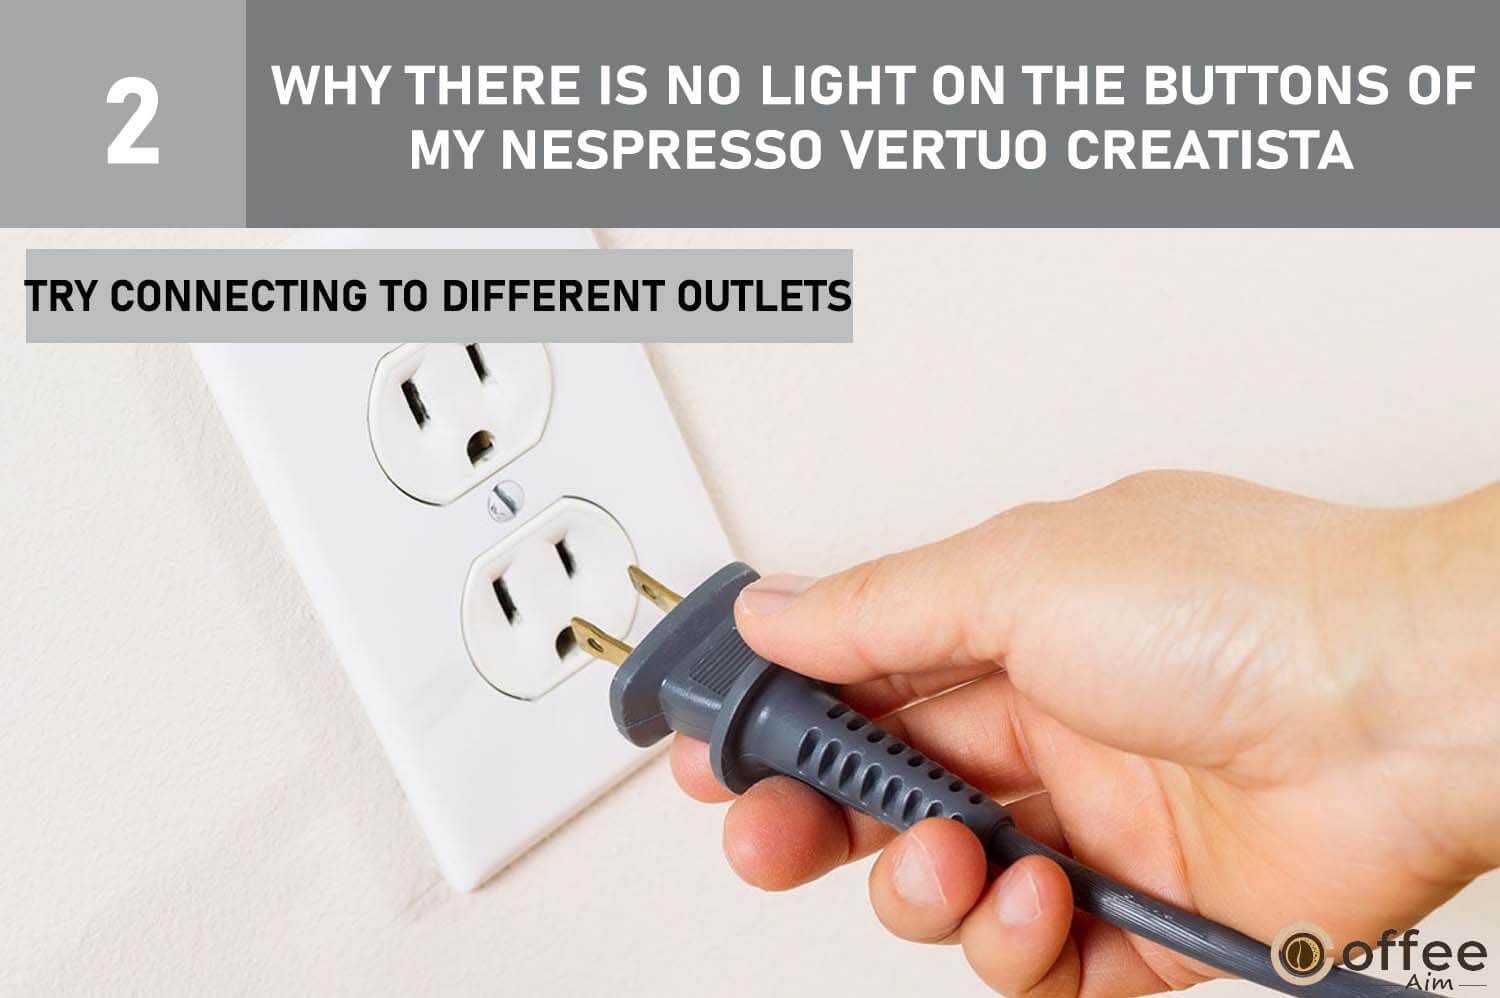 The image shows trying different outlets to fix Nespresso Vertuo Creatista's button light issue as explained in the article.